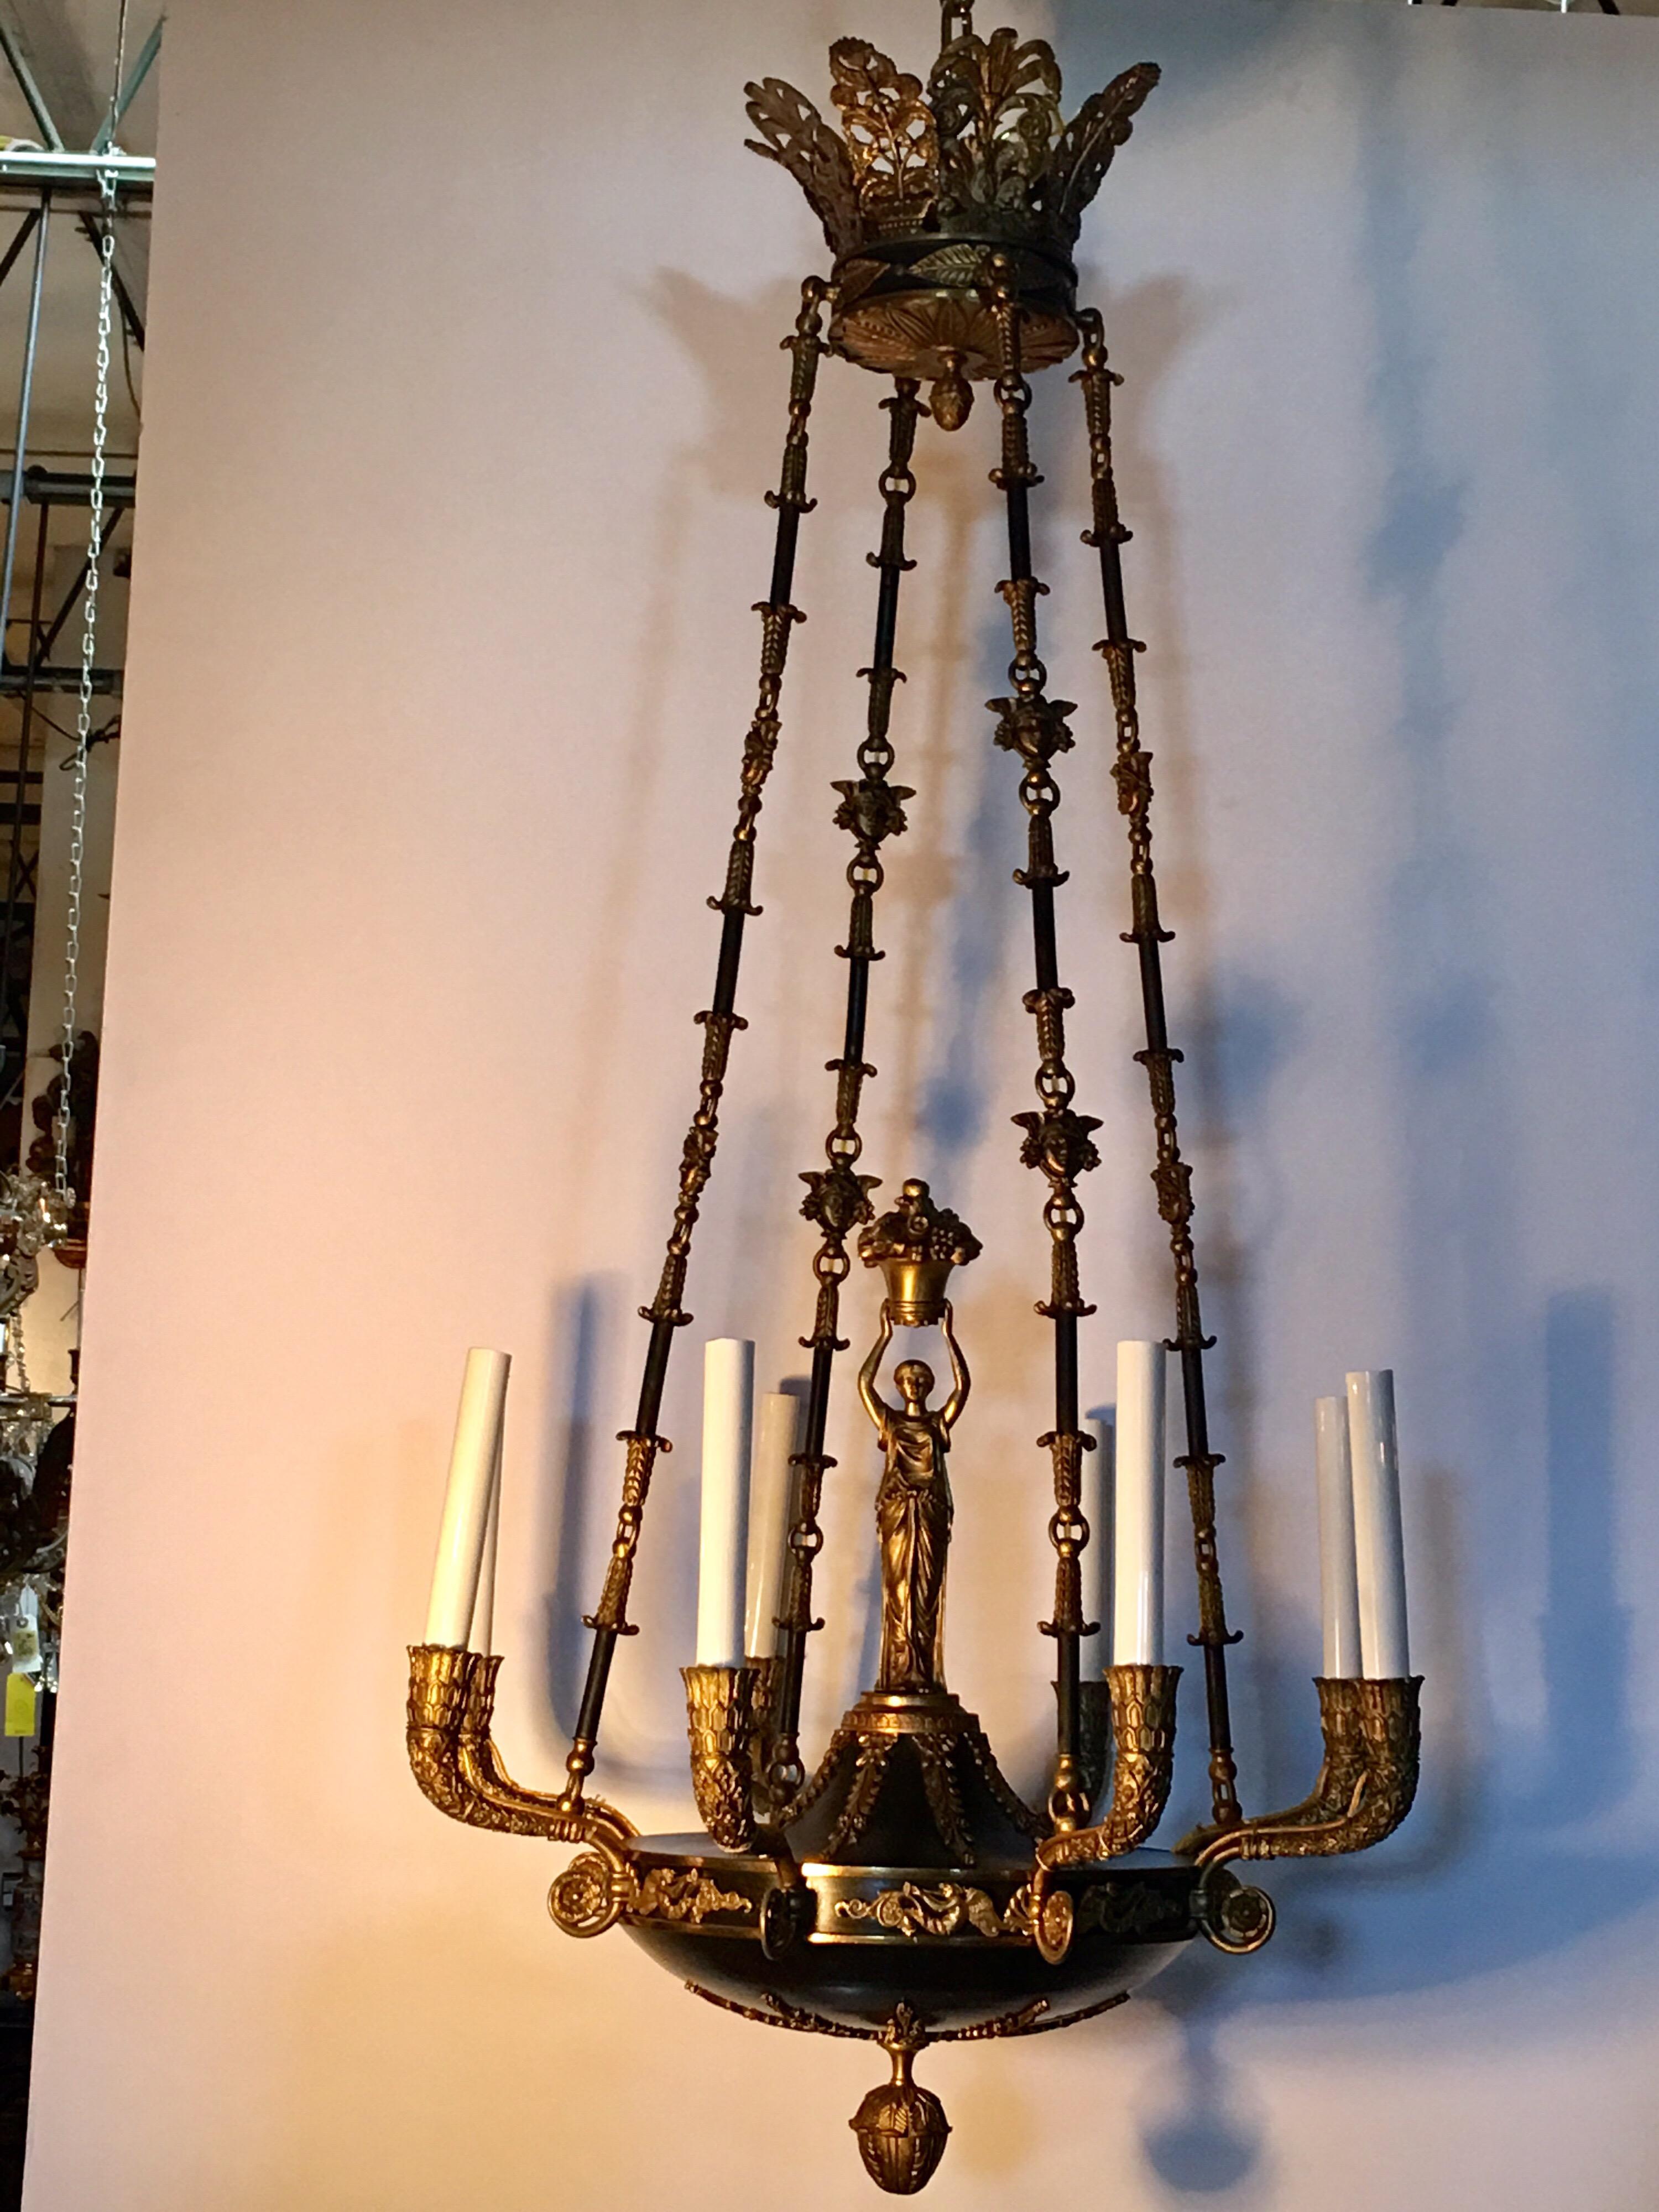 French bronze Empire style chandelier with the goddess Demeter as the center finial.